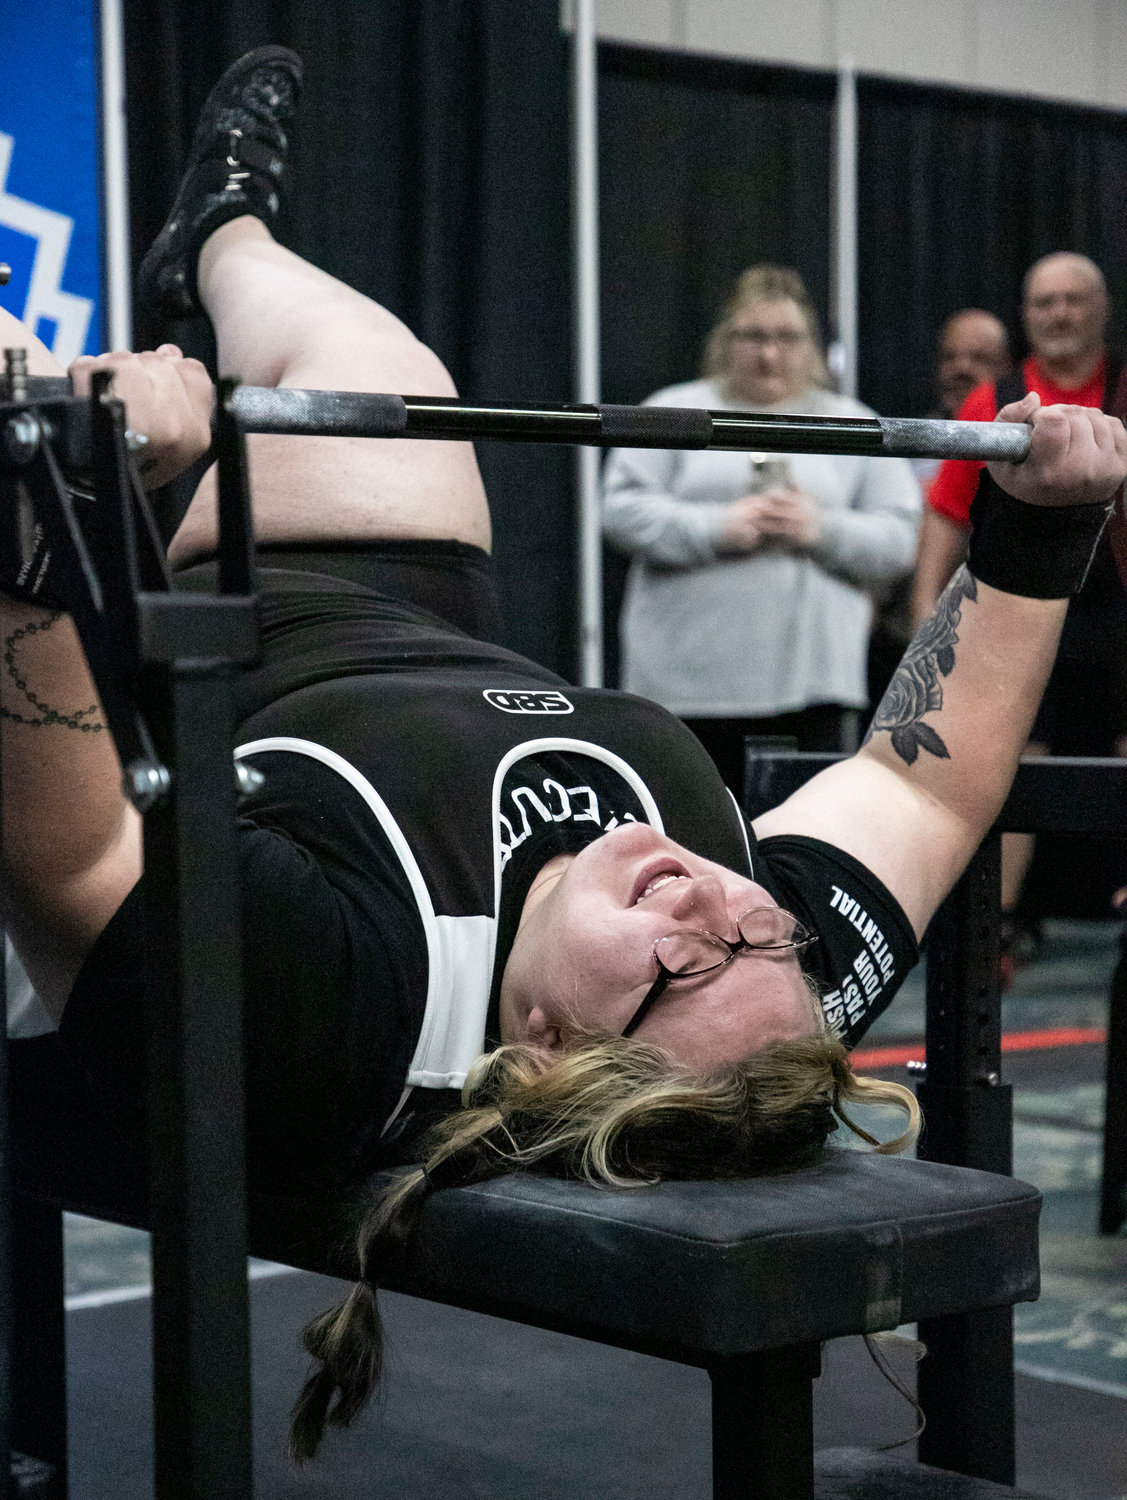 Taylor Castille reacts to her state record bench press of 248 pounds (112.5 kg) Sunday, Oct. 22, on the final day of lifting at the Orange Beach Event Center for the 2022 International Powerlifting League’s world championship meet.